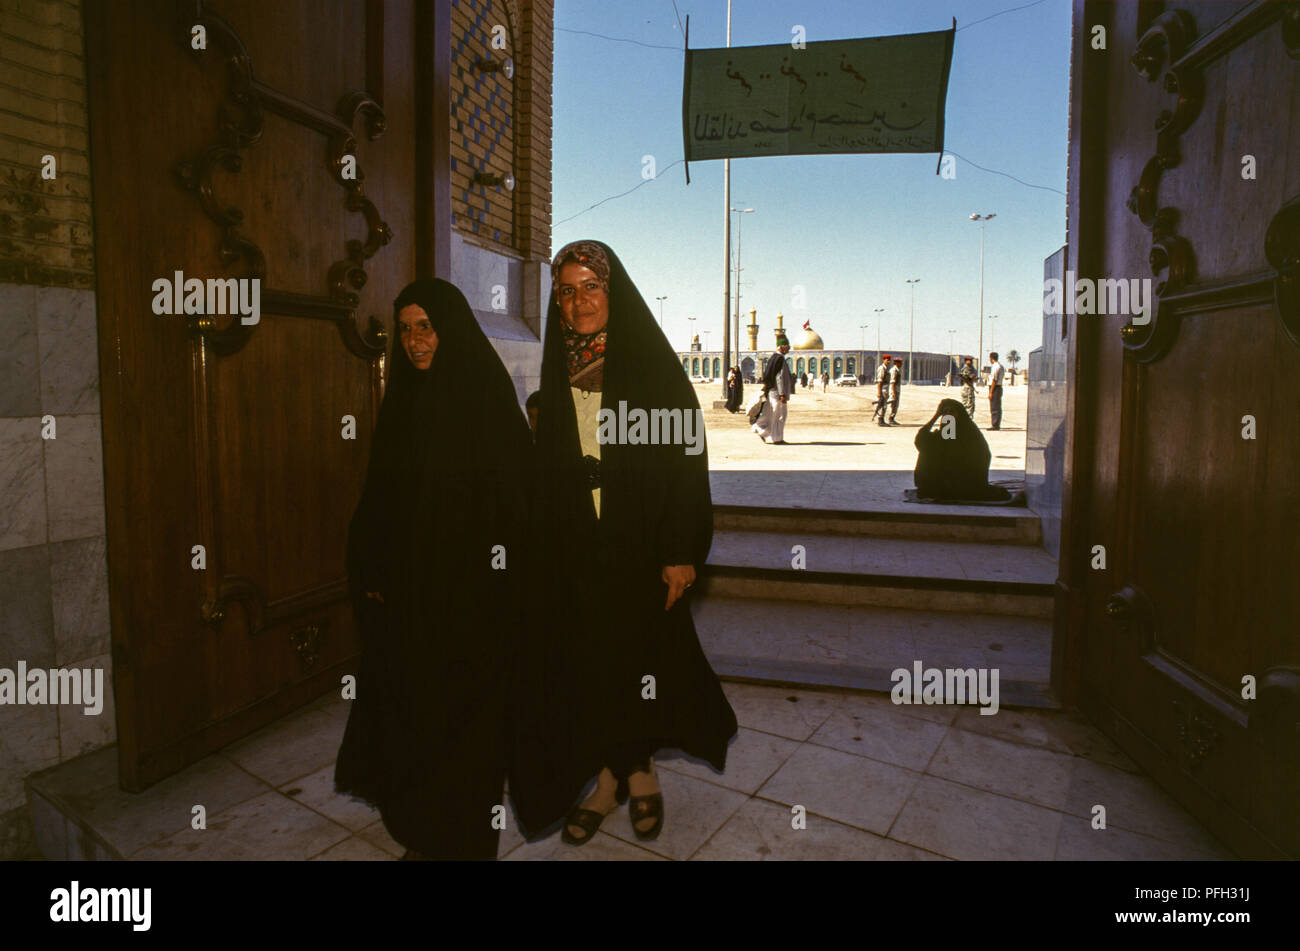 The entrance to the Shi'a Islamic Shrine in Karbala Stock Photo